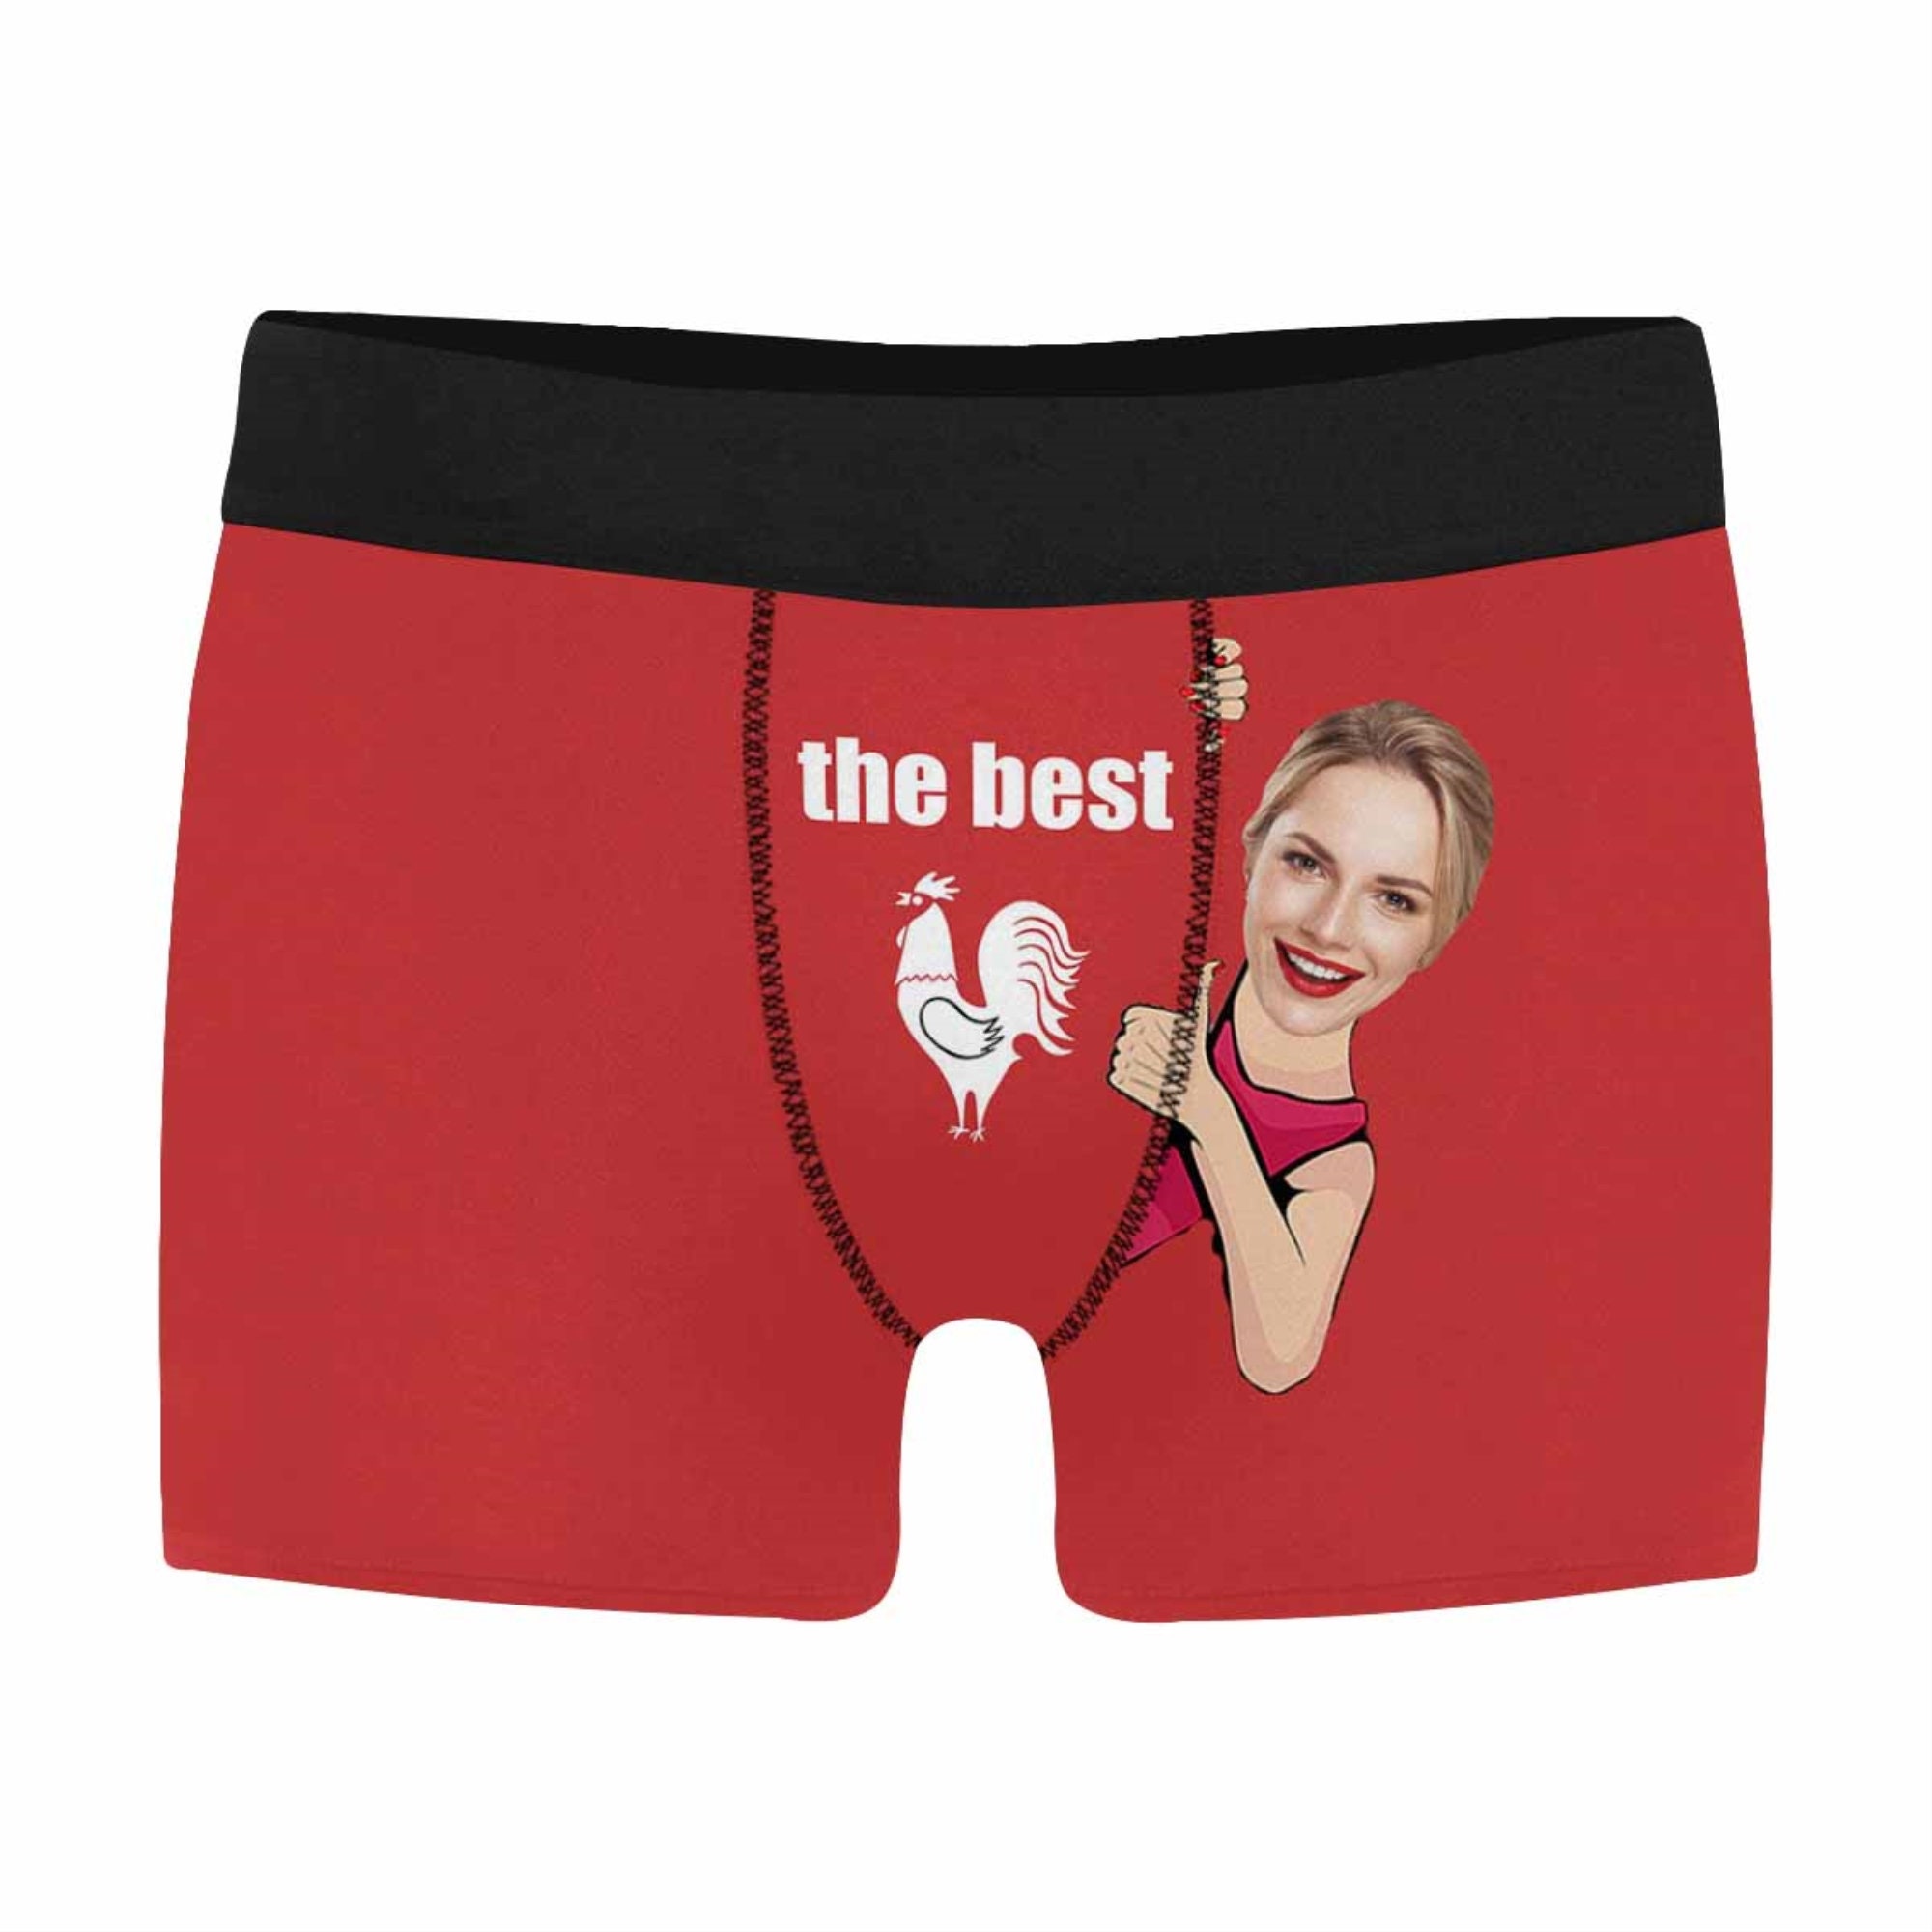 Lovely POD Custom Underwear For Boyfriend - Boxers With Face On Them,  Personalized Underwear For Men Boyfriend Husband, Boxer Briefs With Photo  Face, Valentines Day Gifts For Him From Girlfriend 23 at